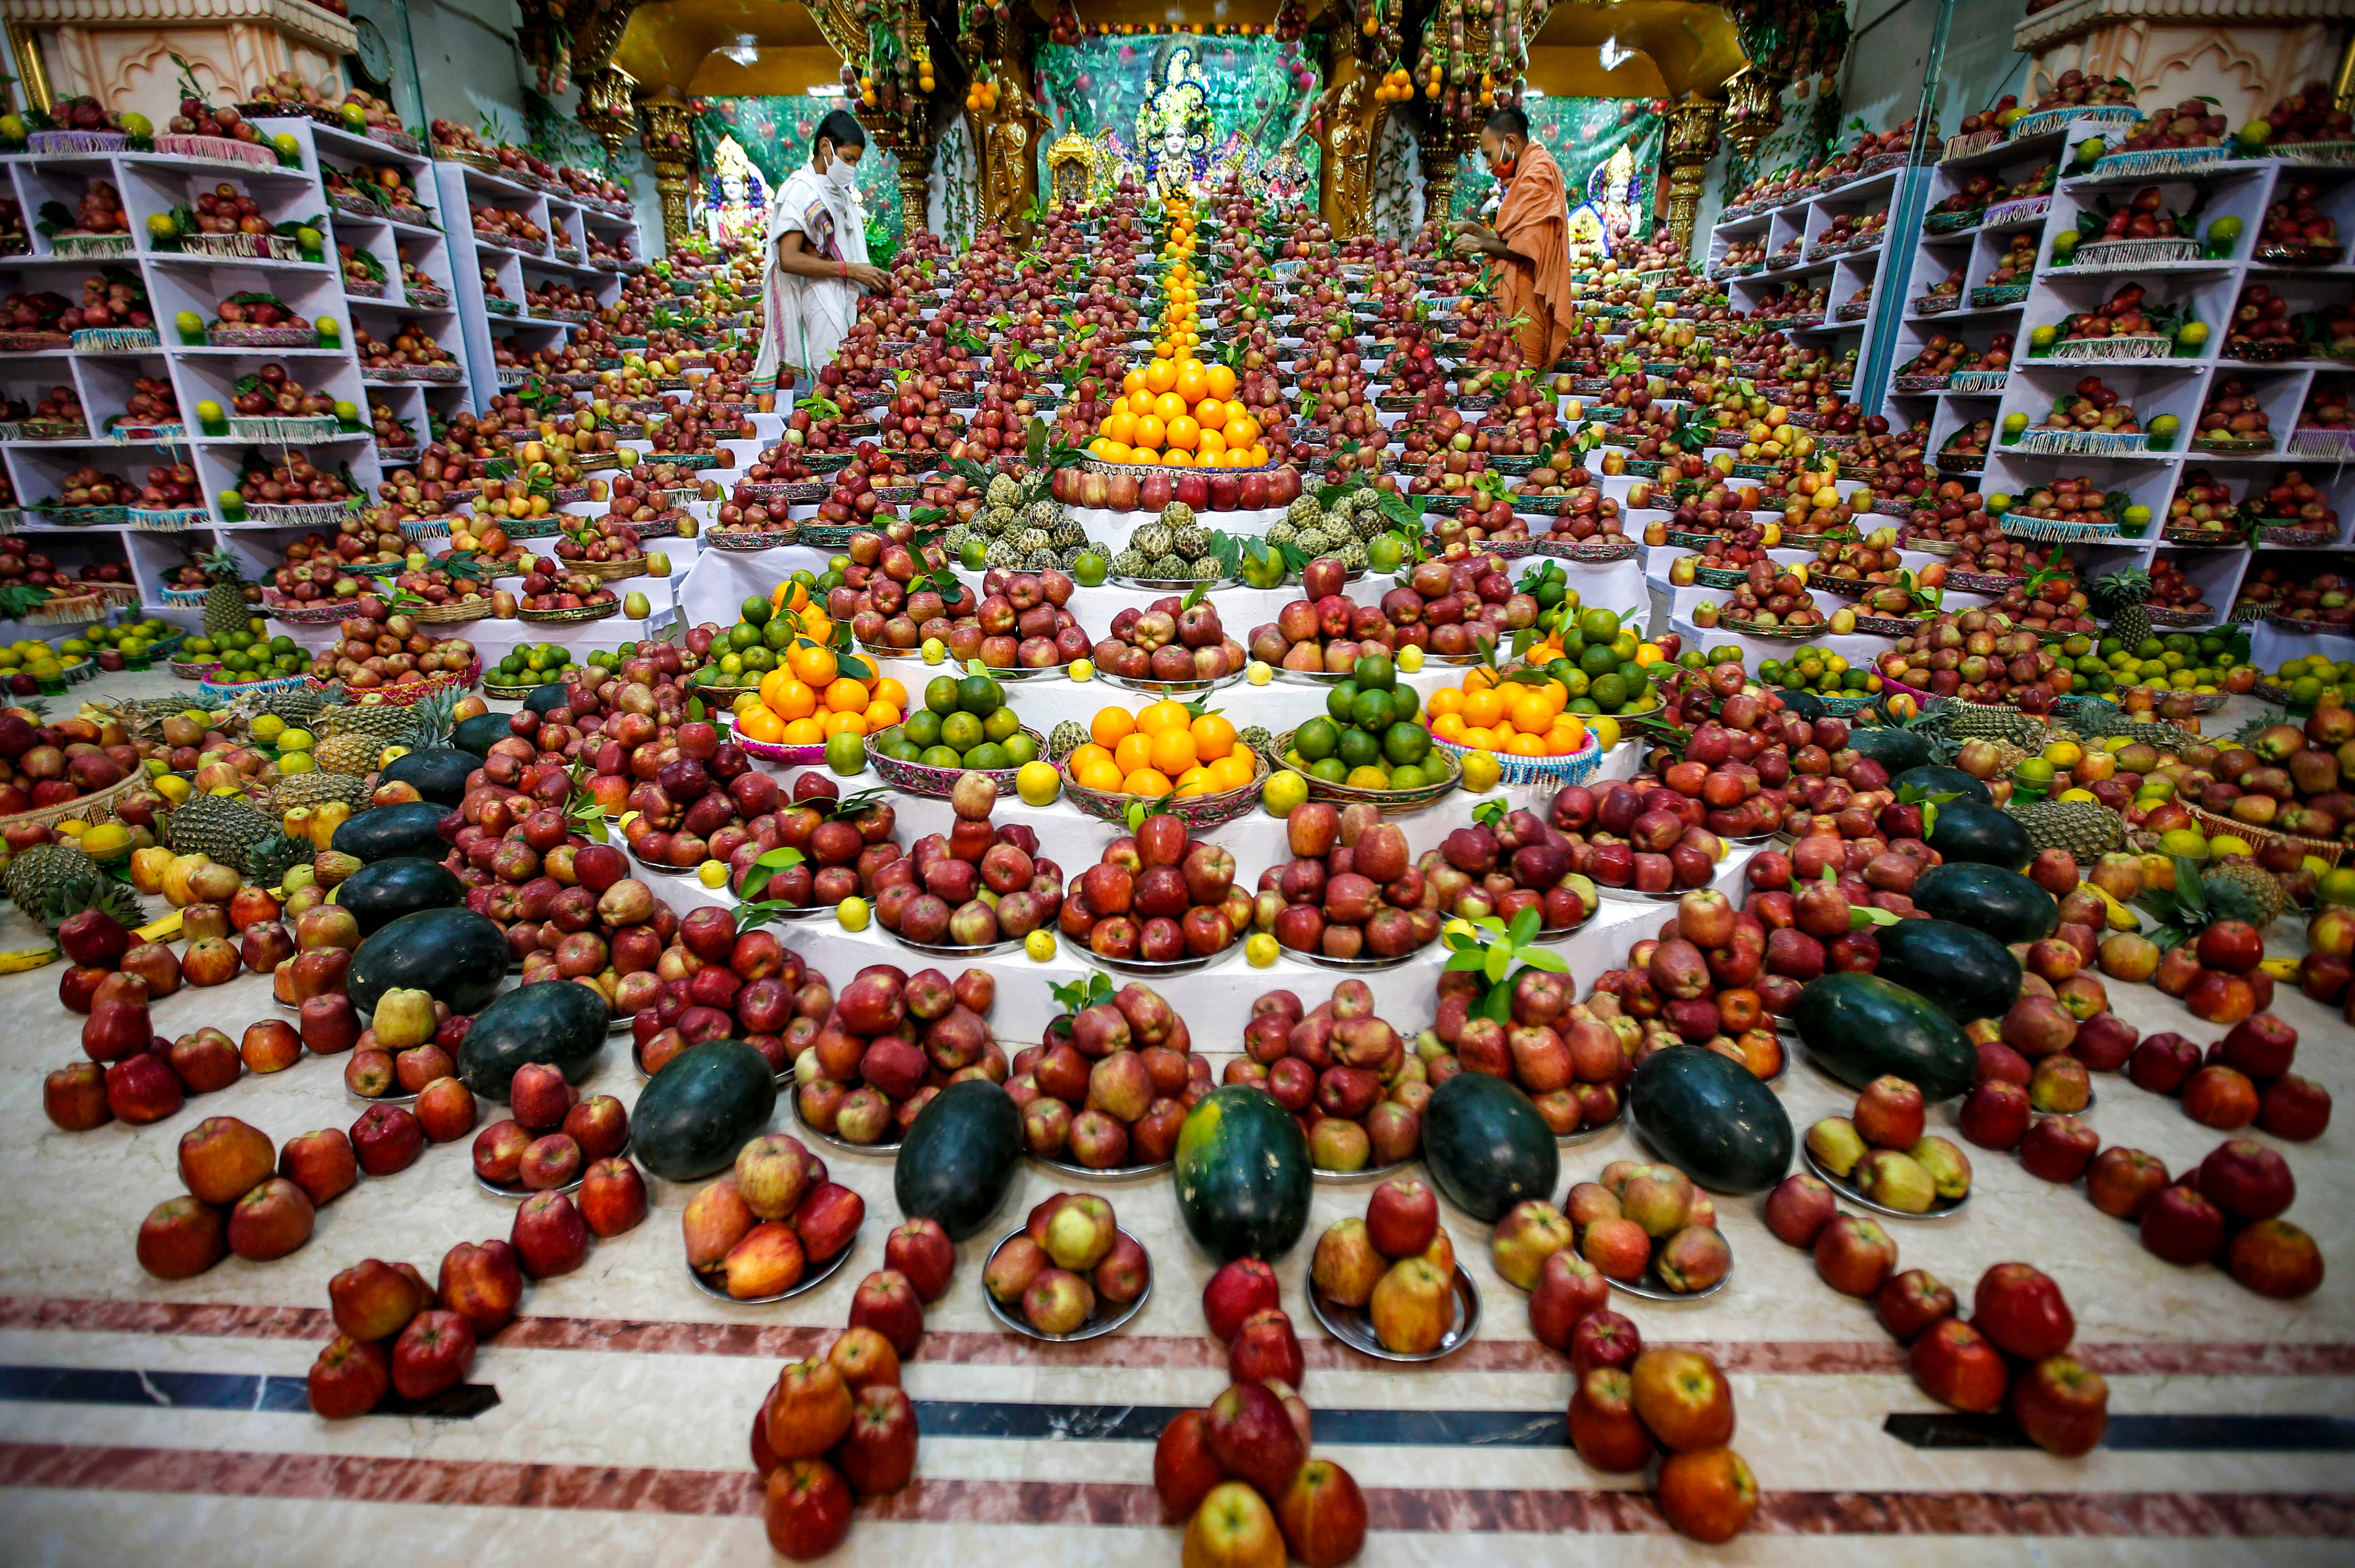 A Hindu priest arranges sweets and fruits, kept as offerings by devotees as part of a ritual to mark 'Annakut' festival , at a temple in Ahmedabad, Tuesday, Oct. 13, 2020. Credit: A Hindu priest arranges sweets and fruits, kept as offerings by devotees as part of a ritual to mark 'Annakut' festival , at a temple in Ahmedabad, Tuesday, Oct. 13, 2020. Credit: PTI PhotoPTI Photo